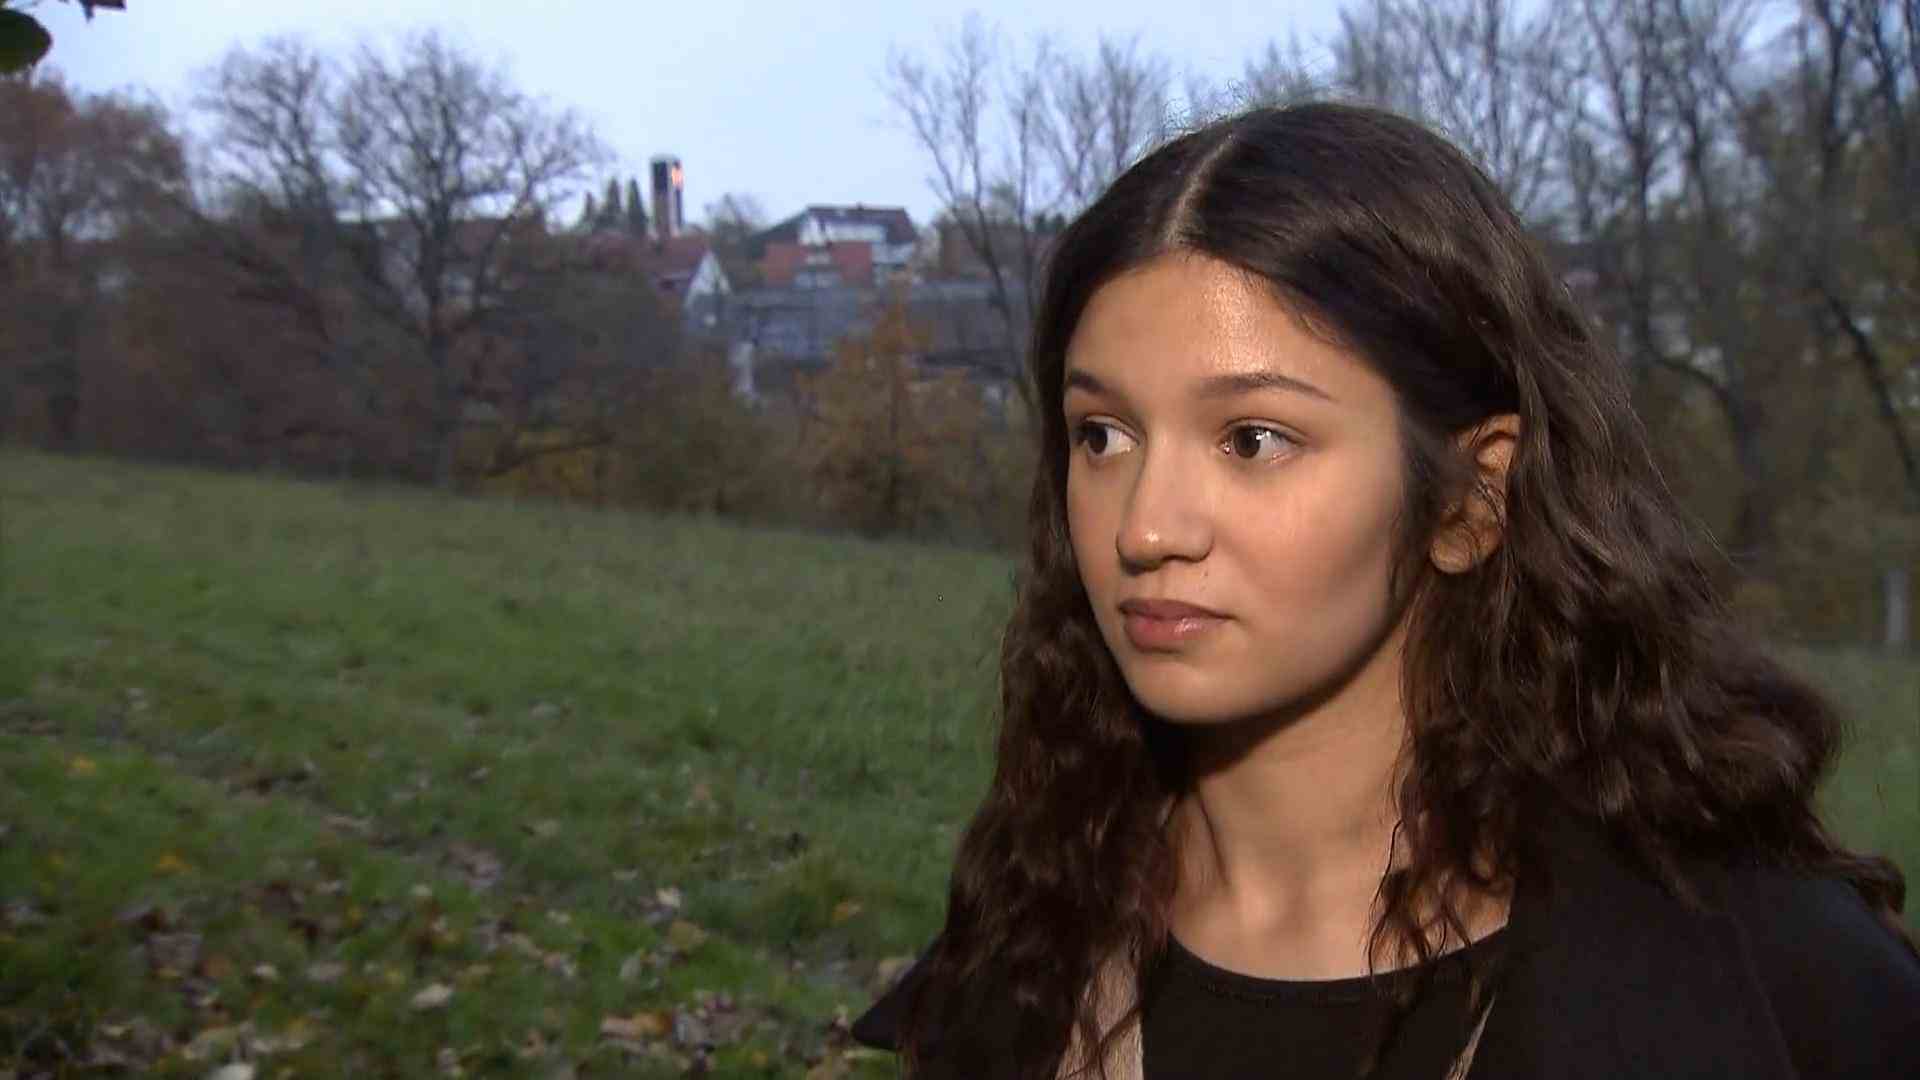 "I was kidnapped here and raped multiple times" Crime victim Selin: Exclusive RTL interview